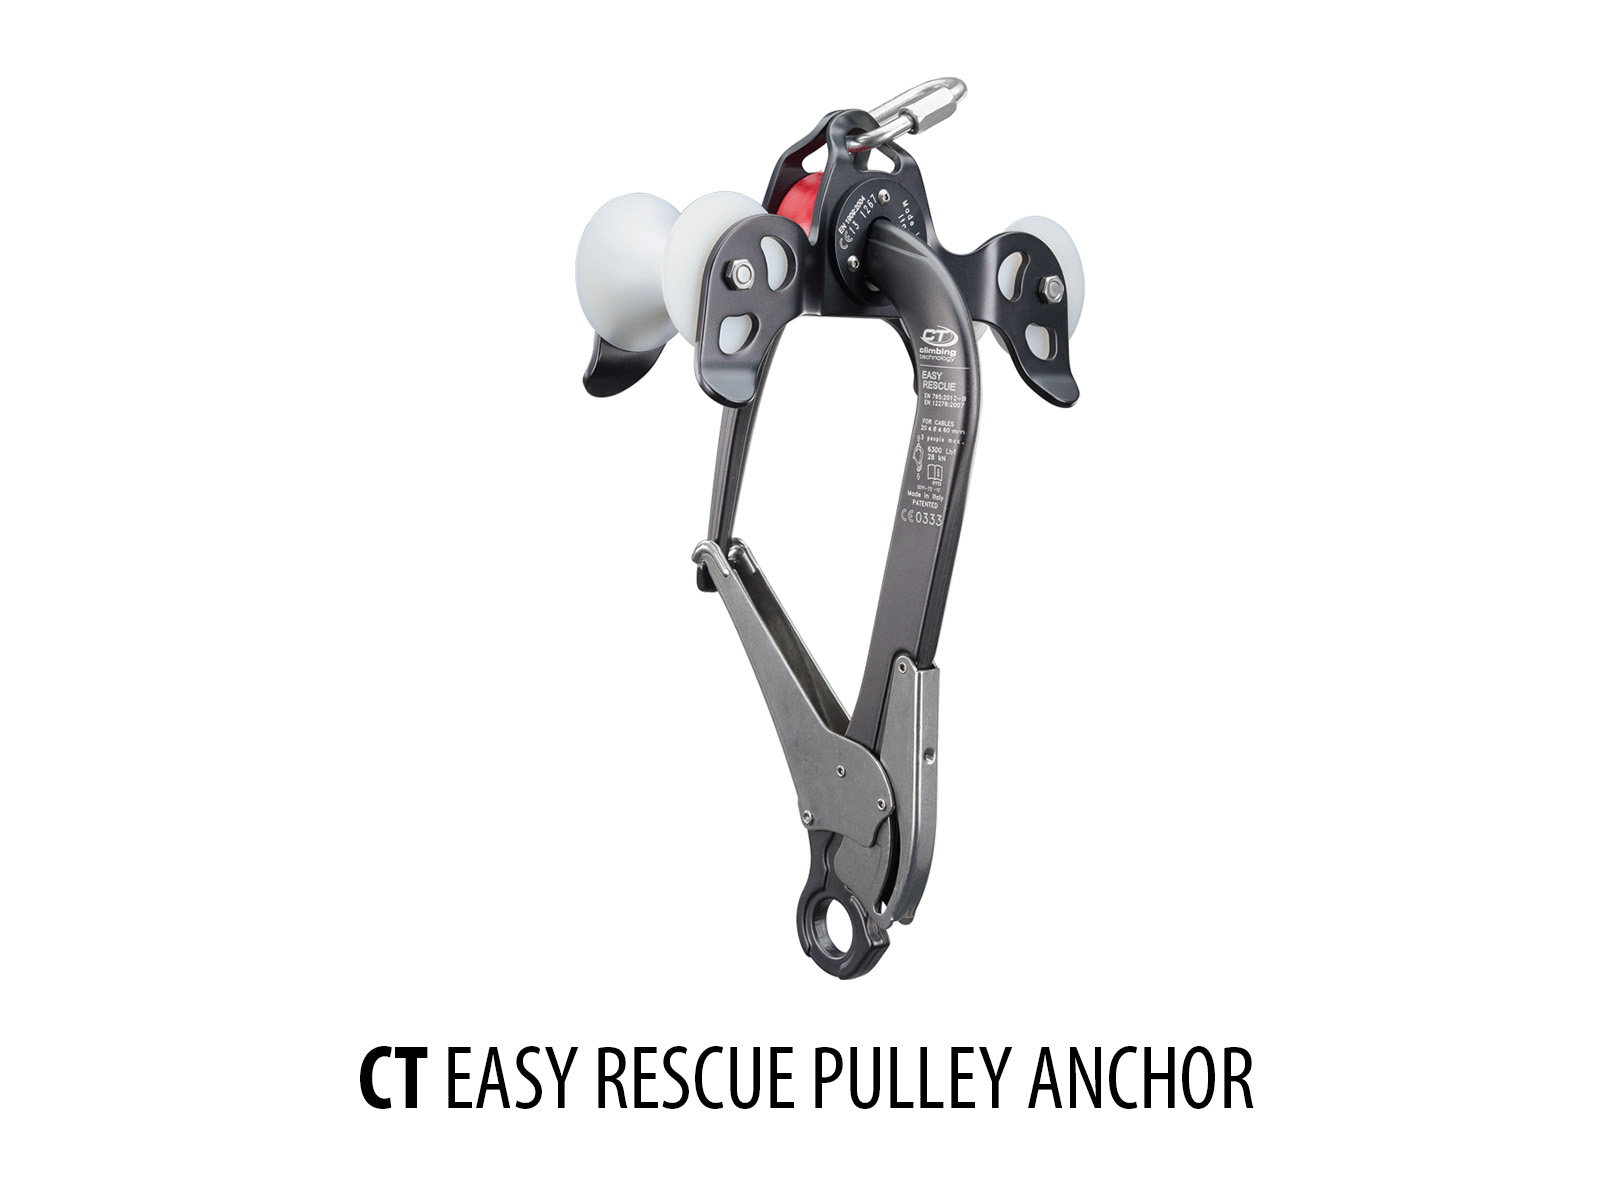 CT Easy Rescue Pulley Anchor